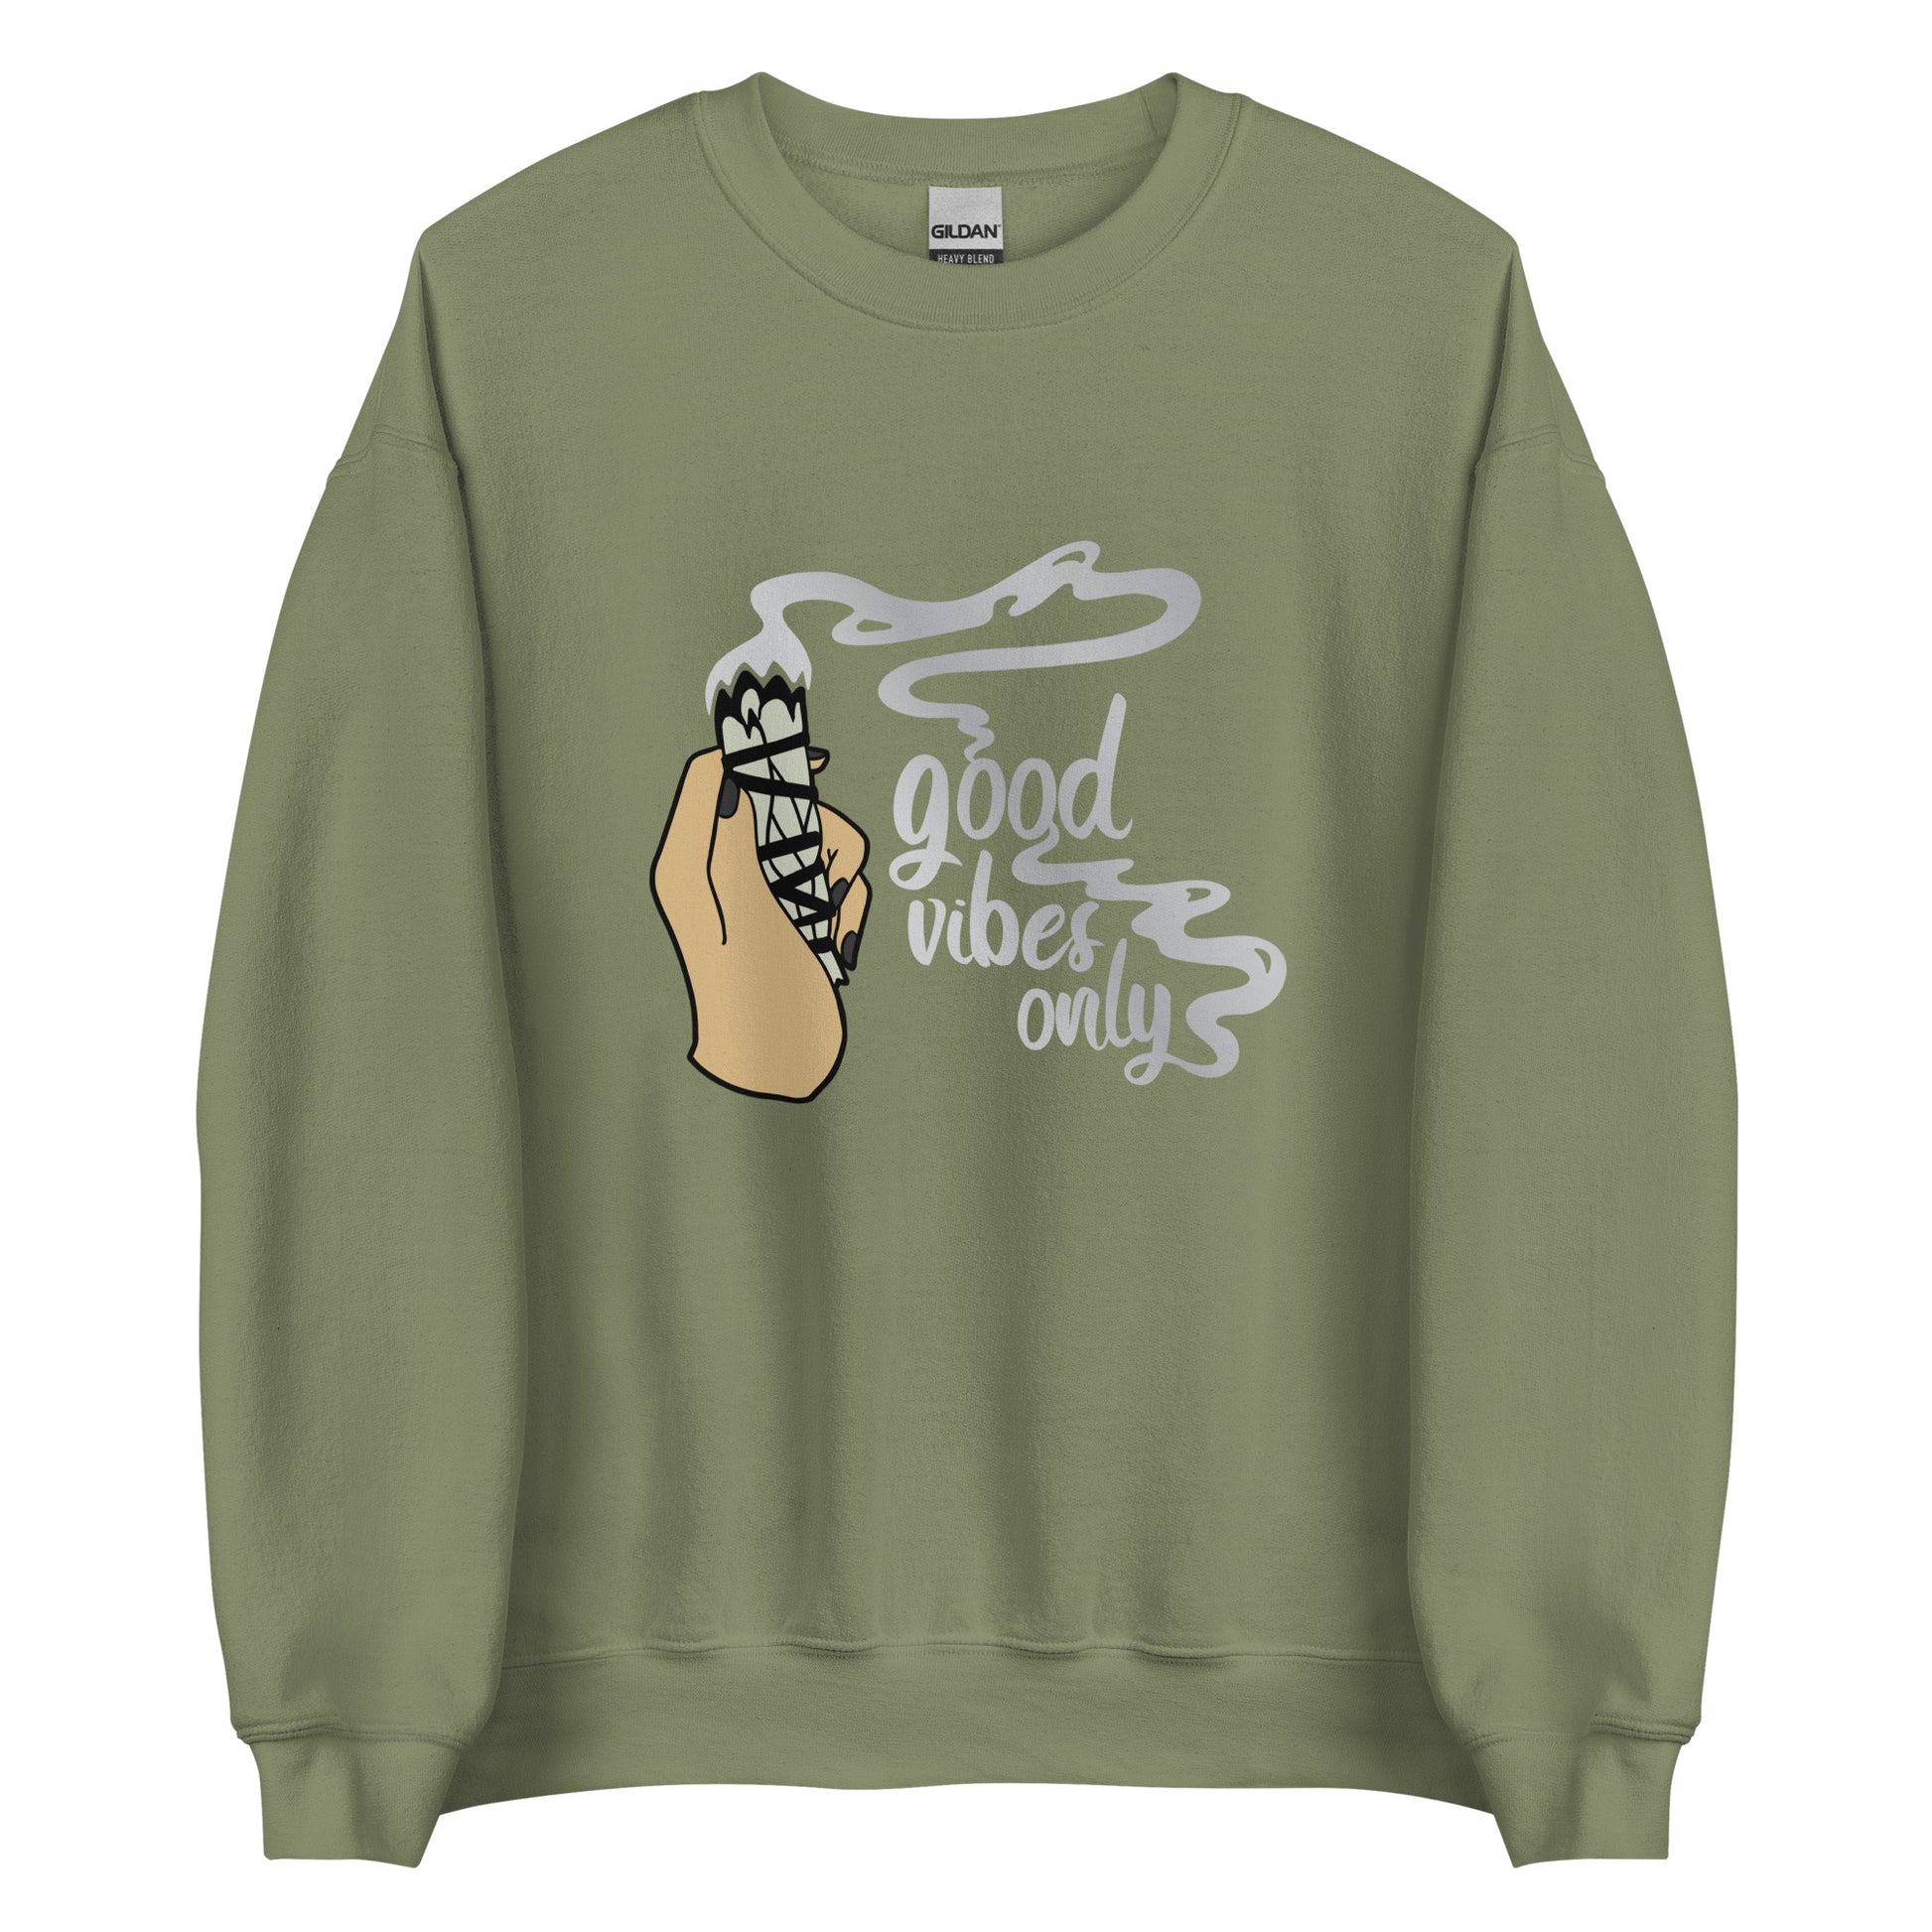 An olive green crewneck sweatshirt featuring an illustration of a hand holding a sage smudge stick. Smoke flows from the tip of the sage and forms text reading "Good vibes only"